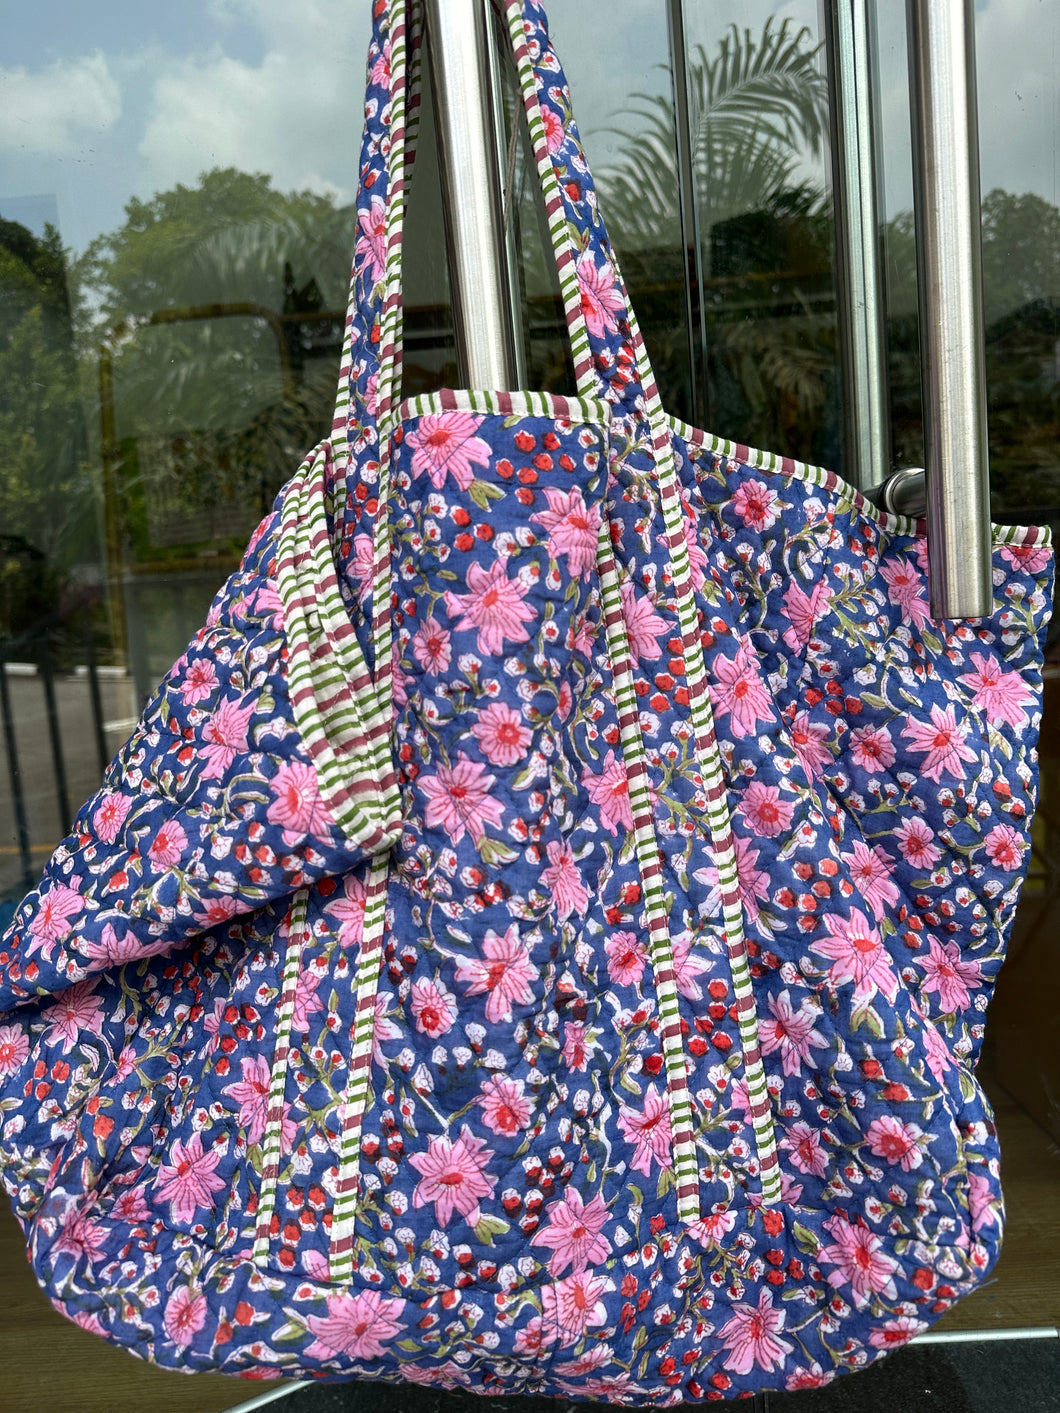 The neverfull tote - blue fun floral